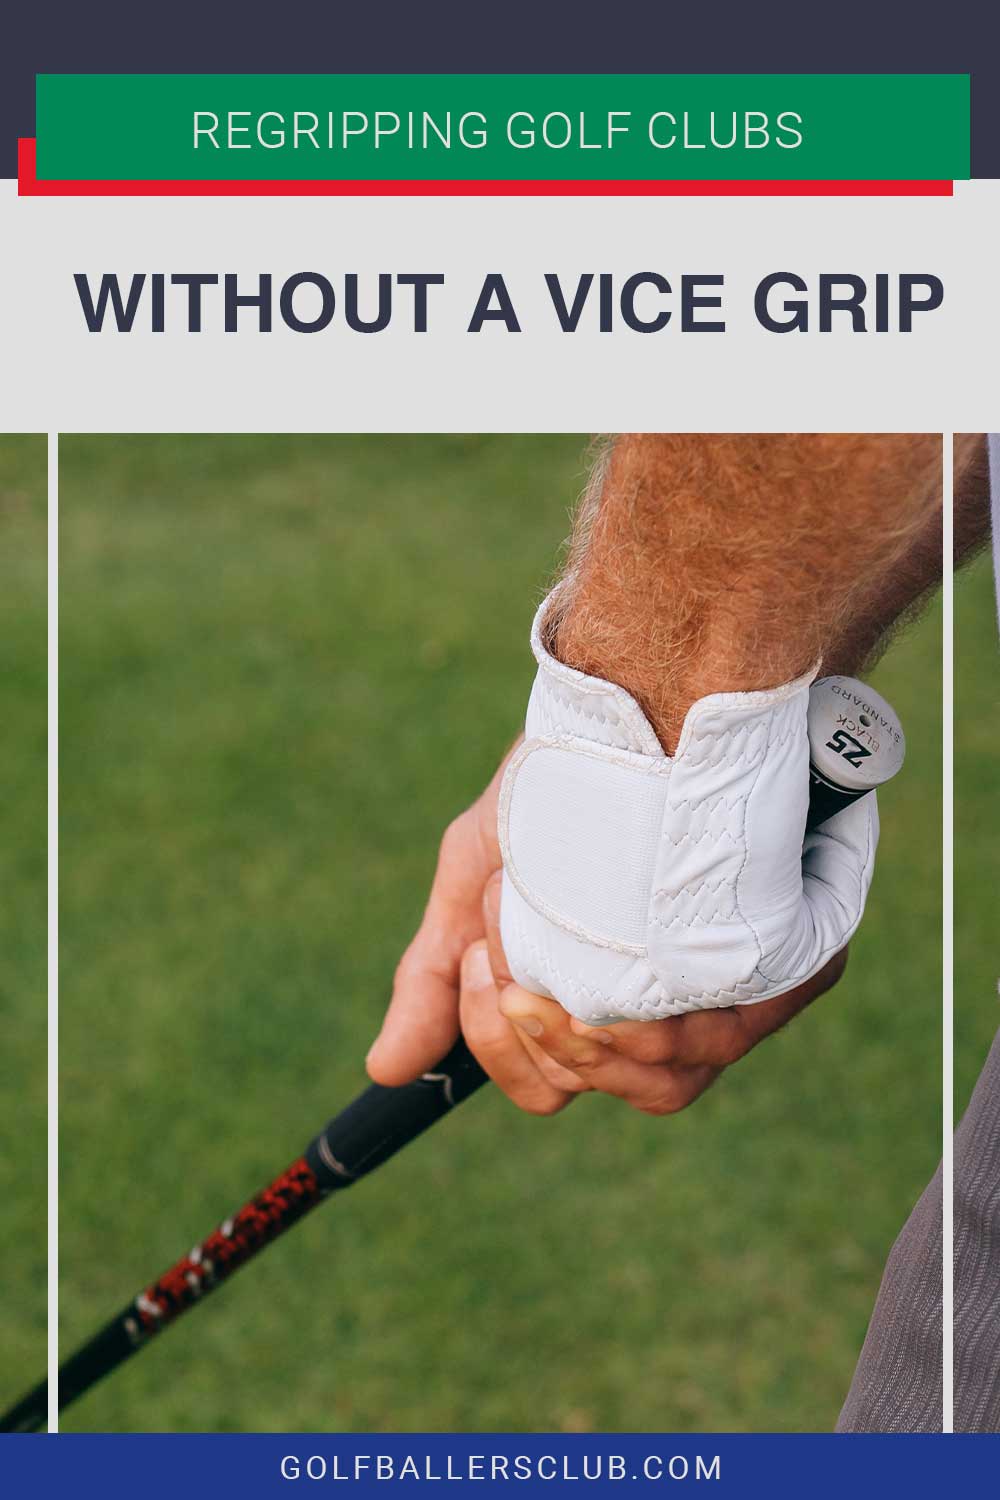 Person holding a golf club wearing a golf glove in left hand - Regripping Golf Clubs Without A Vice Grip.